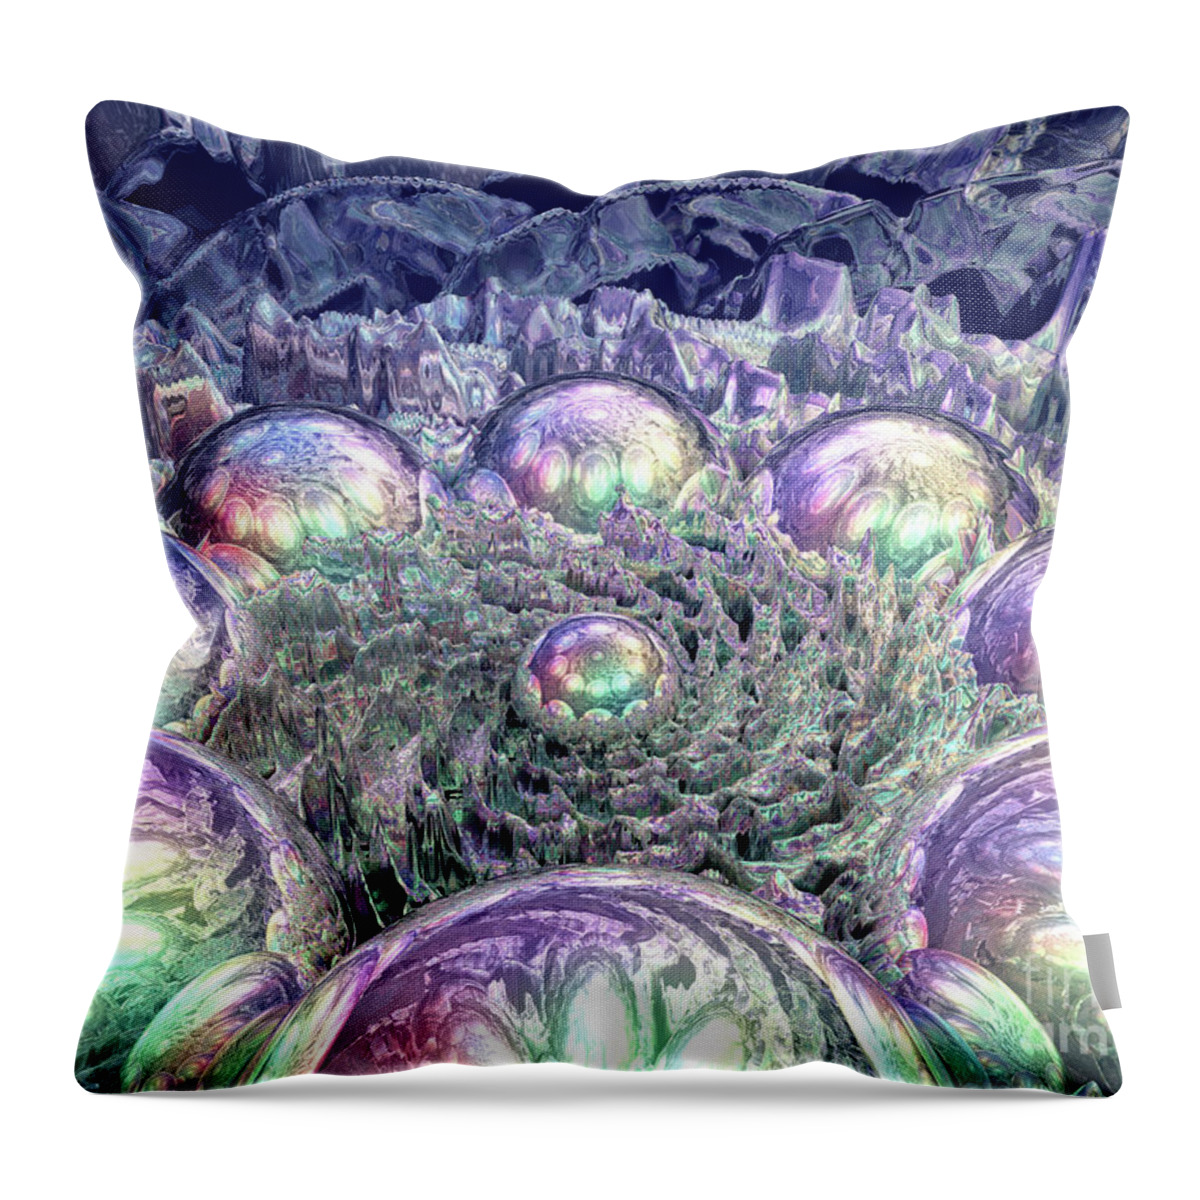 Universe Throw Pillow featuring the digital art Expanding Universe by Phil Perkins